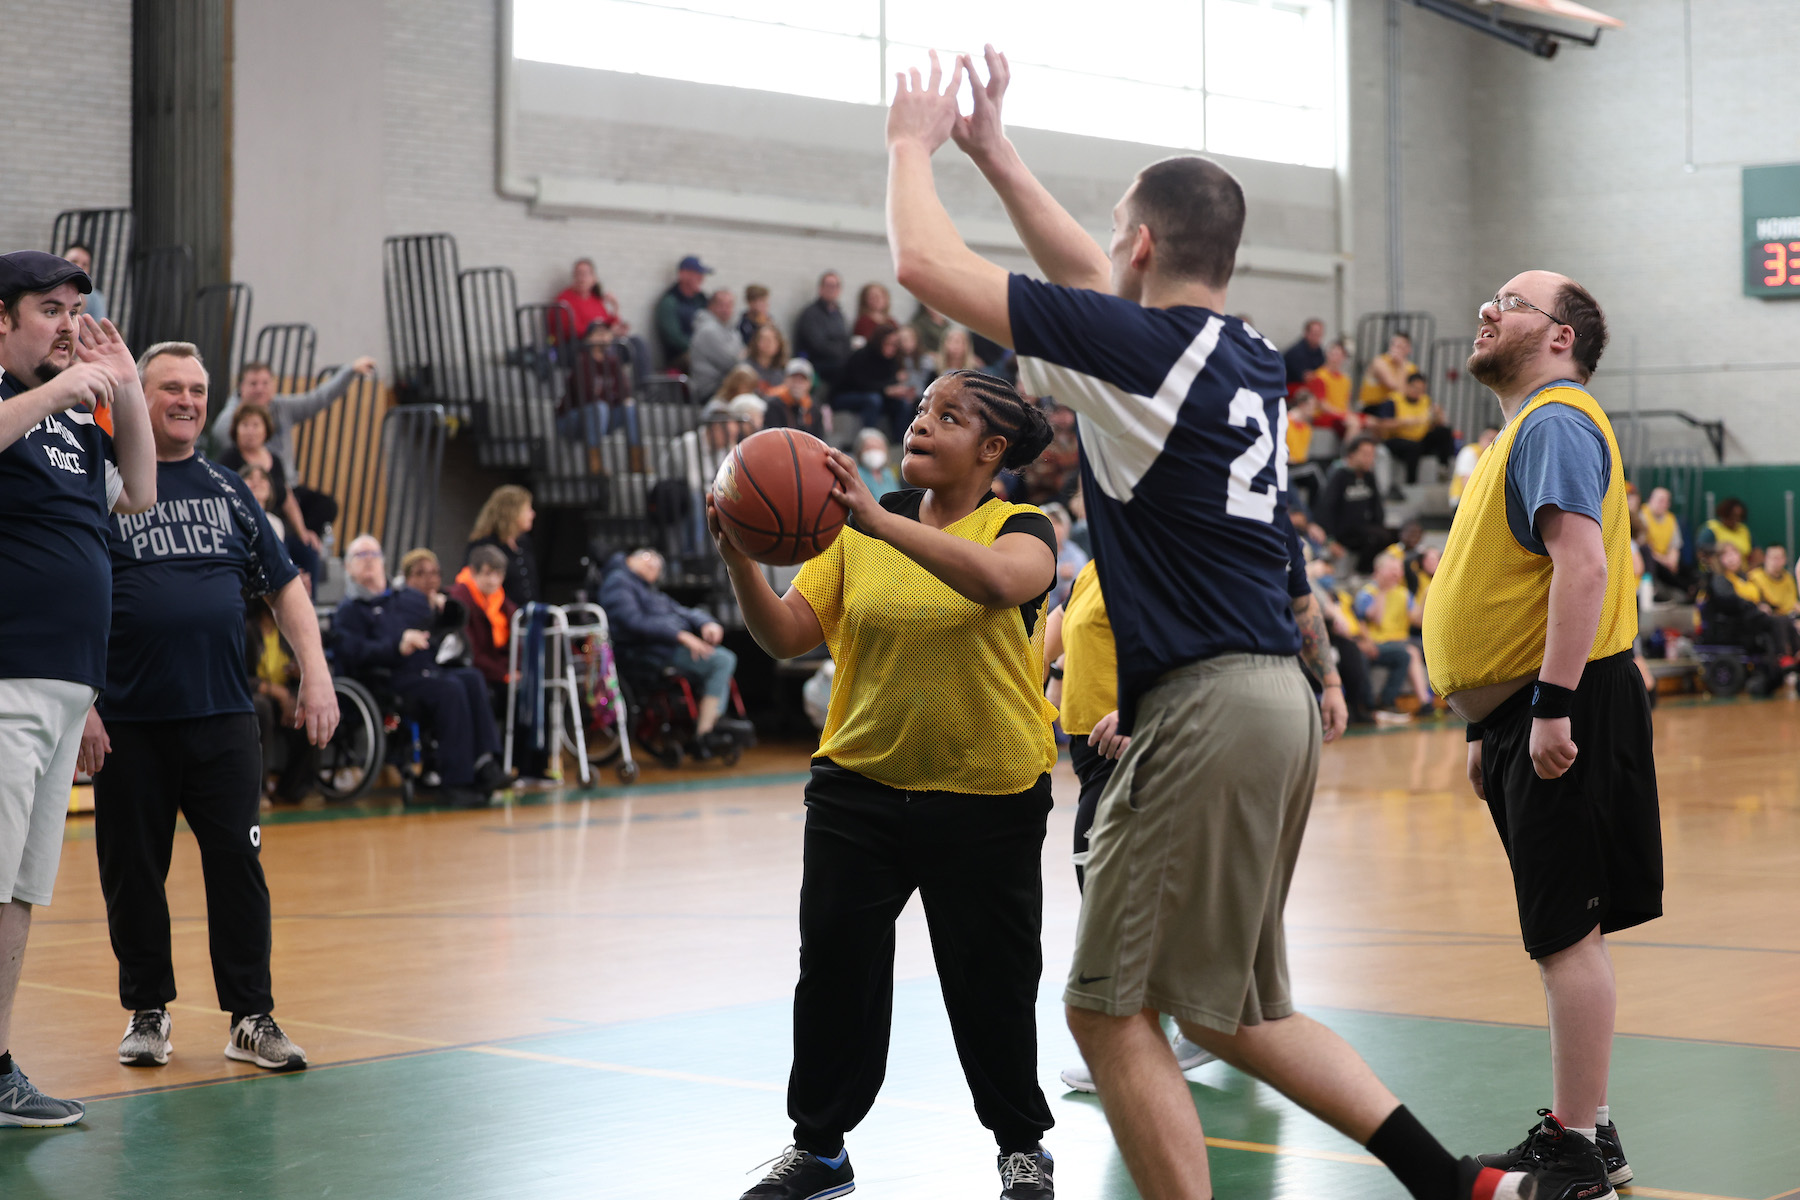 Special Olympics vs. HPD Basketball Game March 24